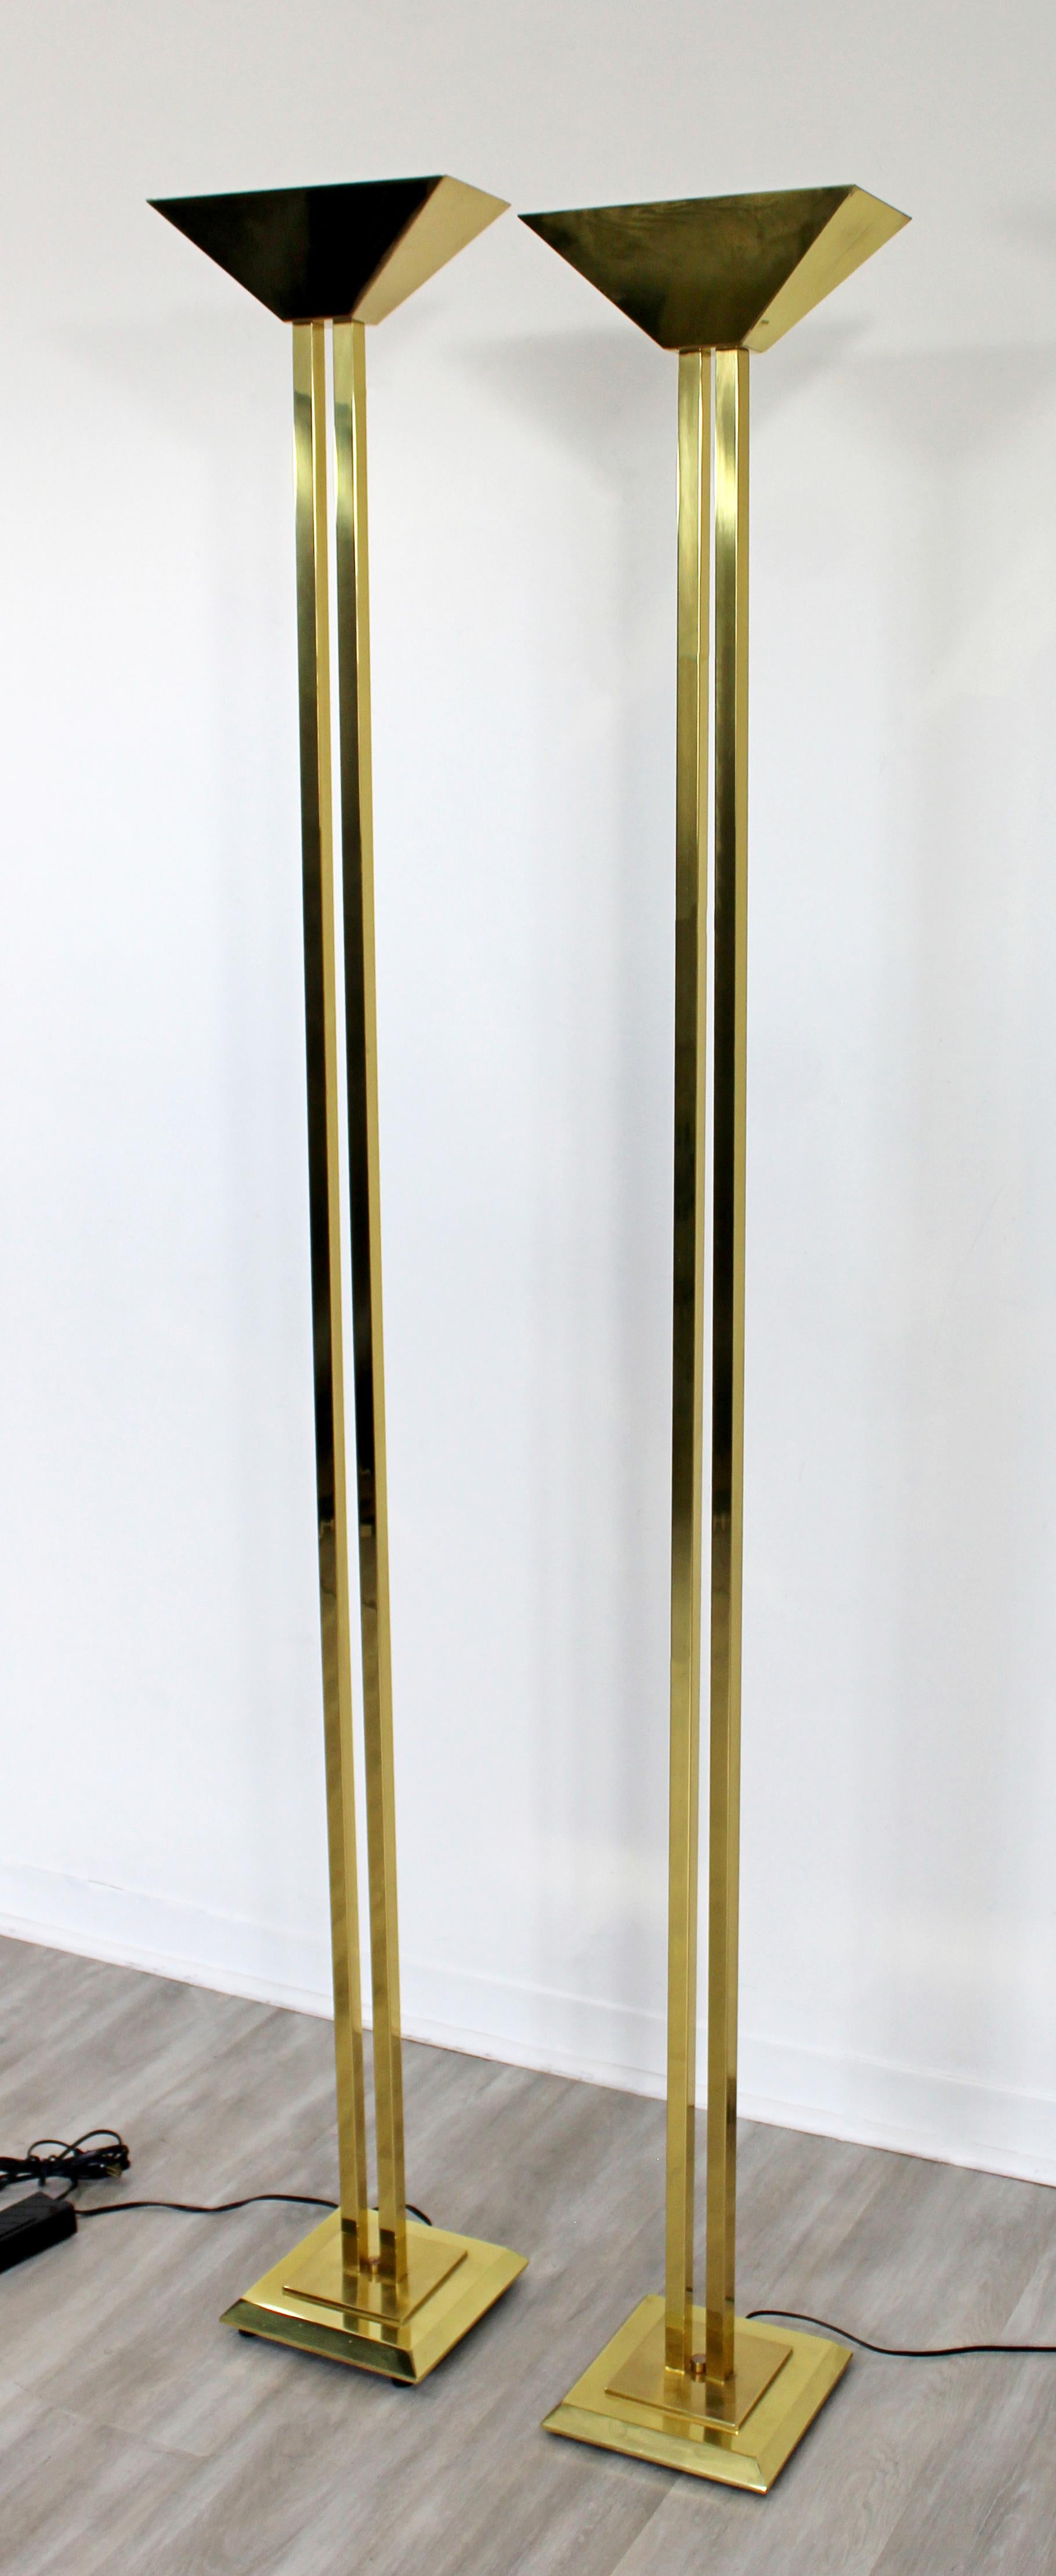 For your consideration is a terrific pair of brass torchiere floor lamps, by George Kovacs, circa 1970s. In excellent vintage condition. The dimensions are 10.5